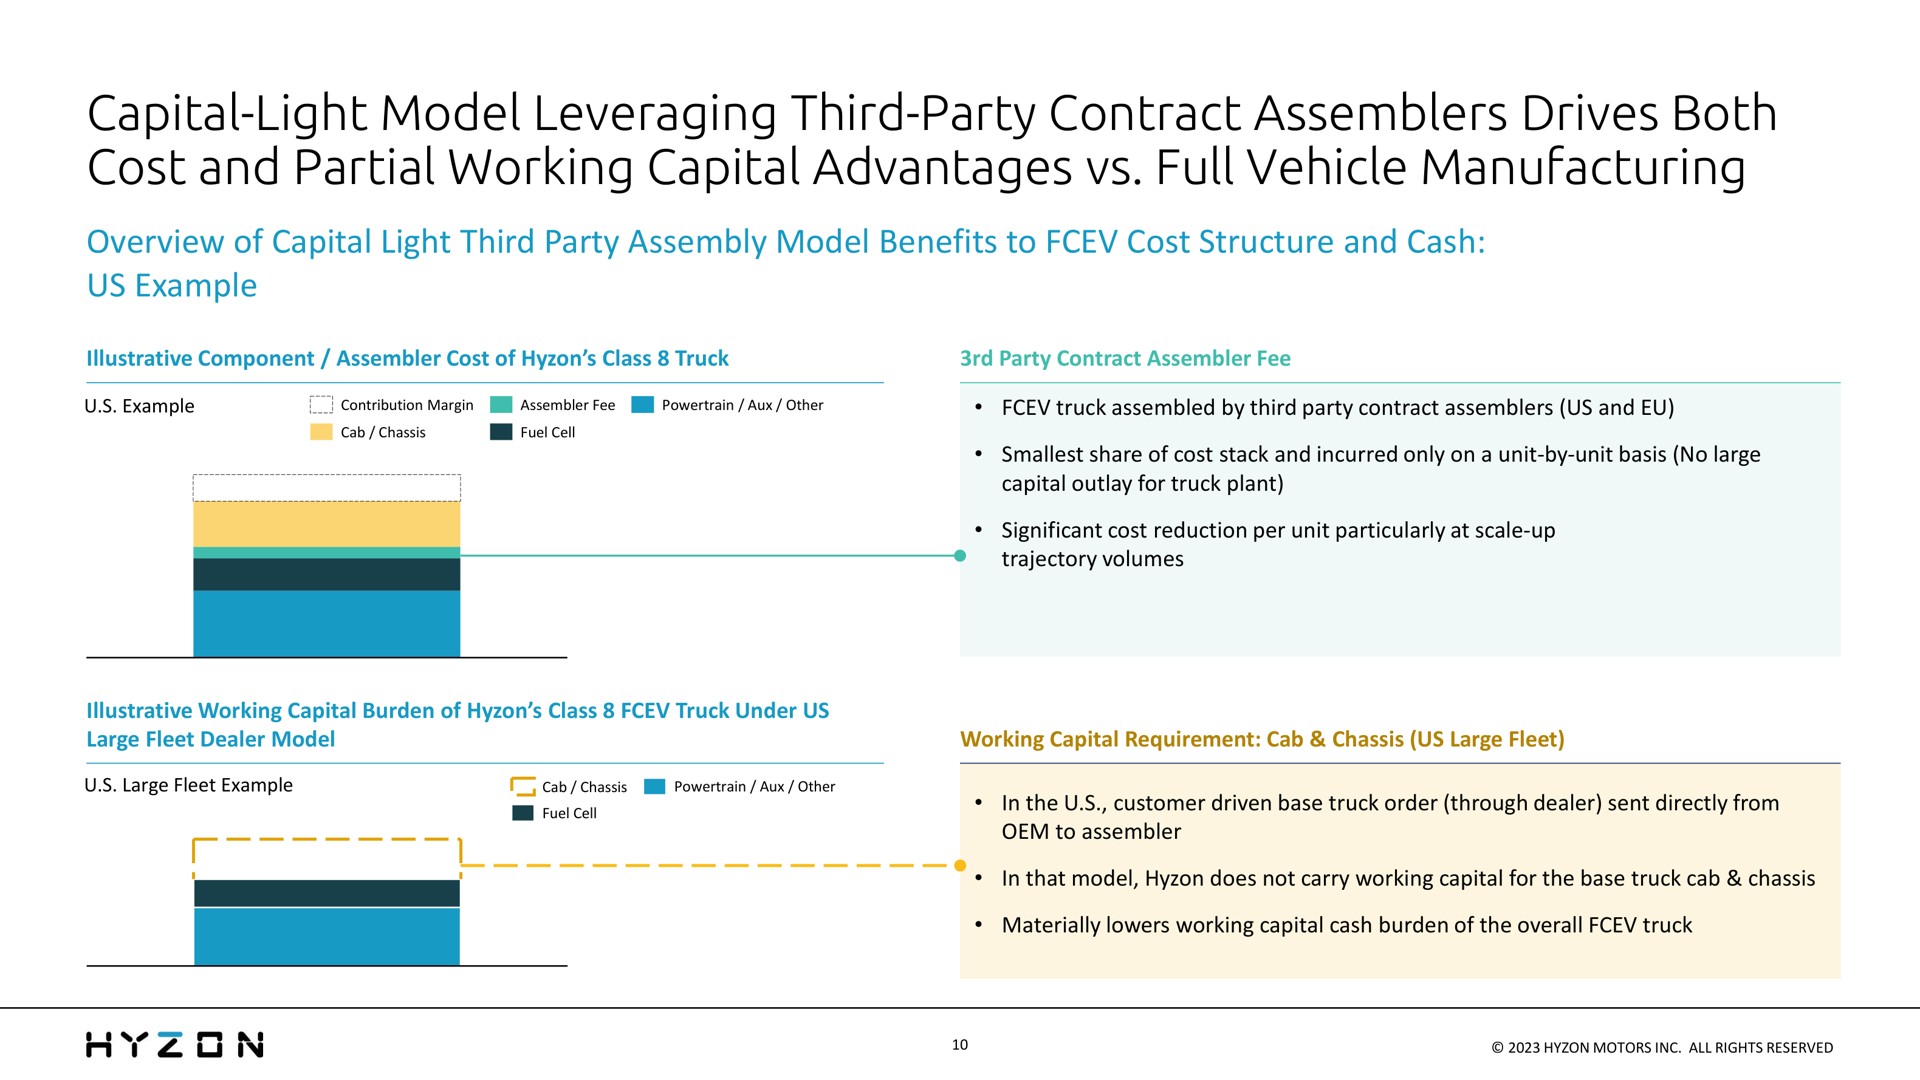 capital light model leveraging third party contract assemblers drives both cost and partial working capital advantages full vehicle manufacturing | Hyzon